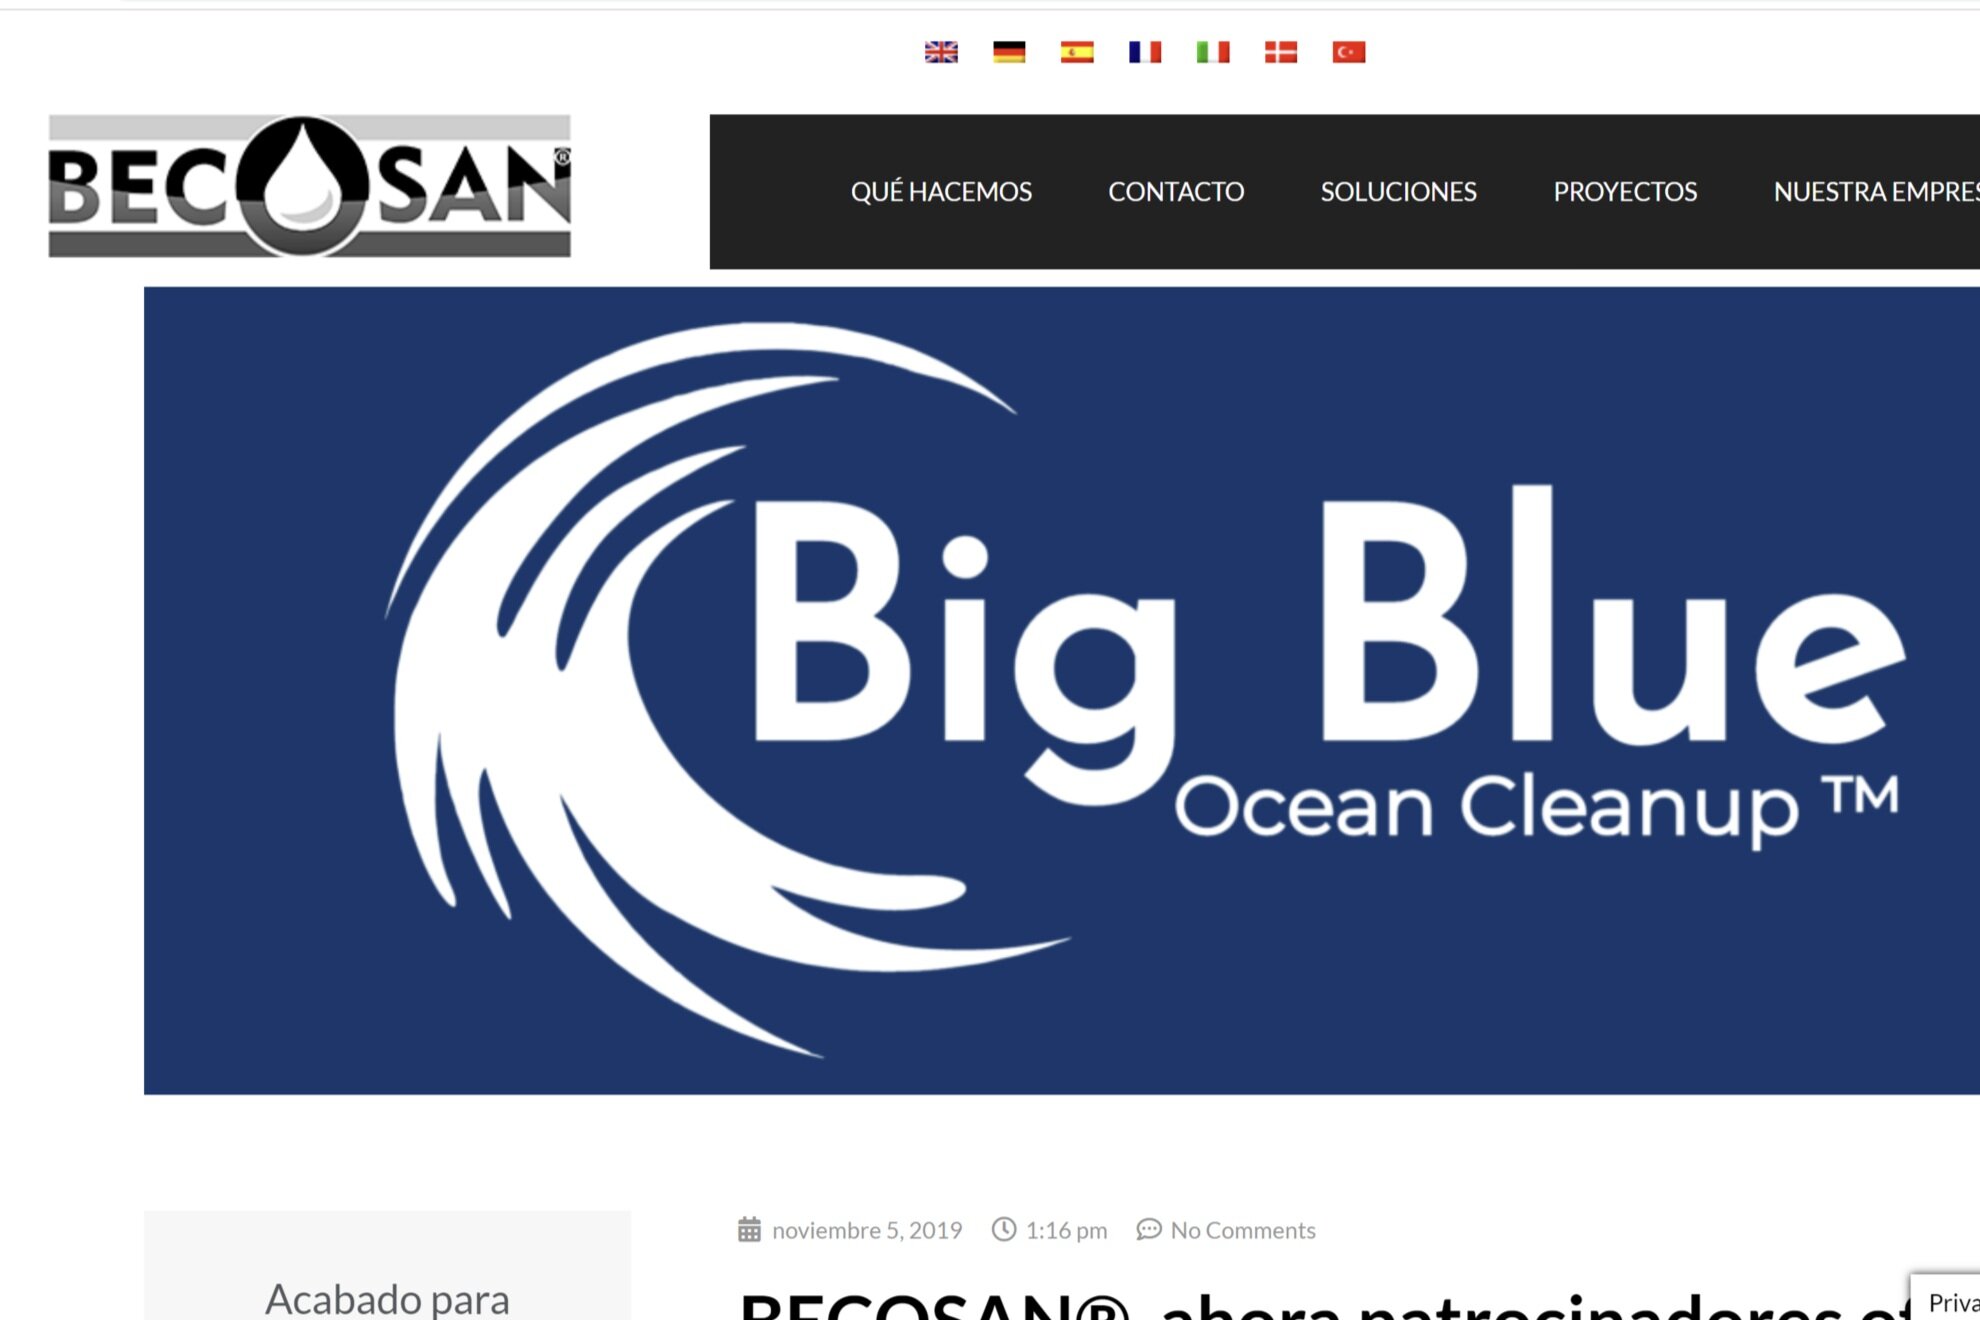 Ride+on+Retreats+supporting+the+Big+Blue+Ocean+Cleanup%21+%E2%80%94+Ride+on+Retreats+-+Google+Chrome+03_05_2020+15_06_40.jpg